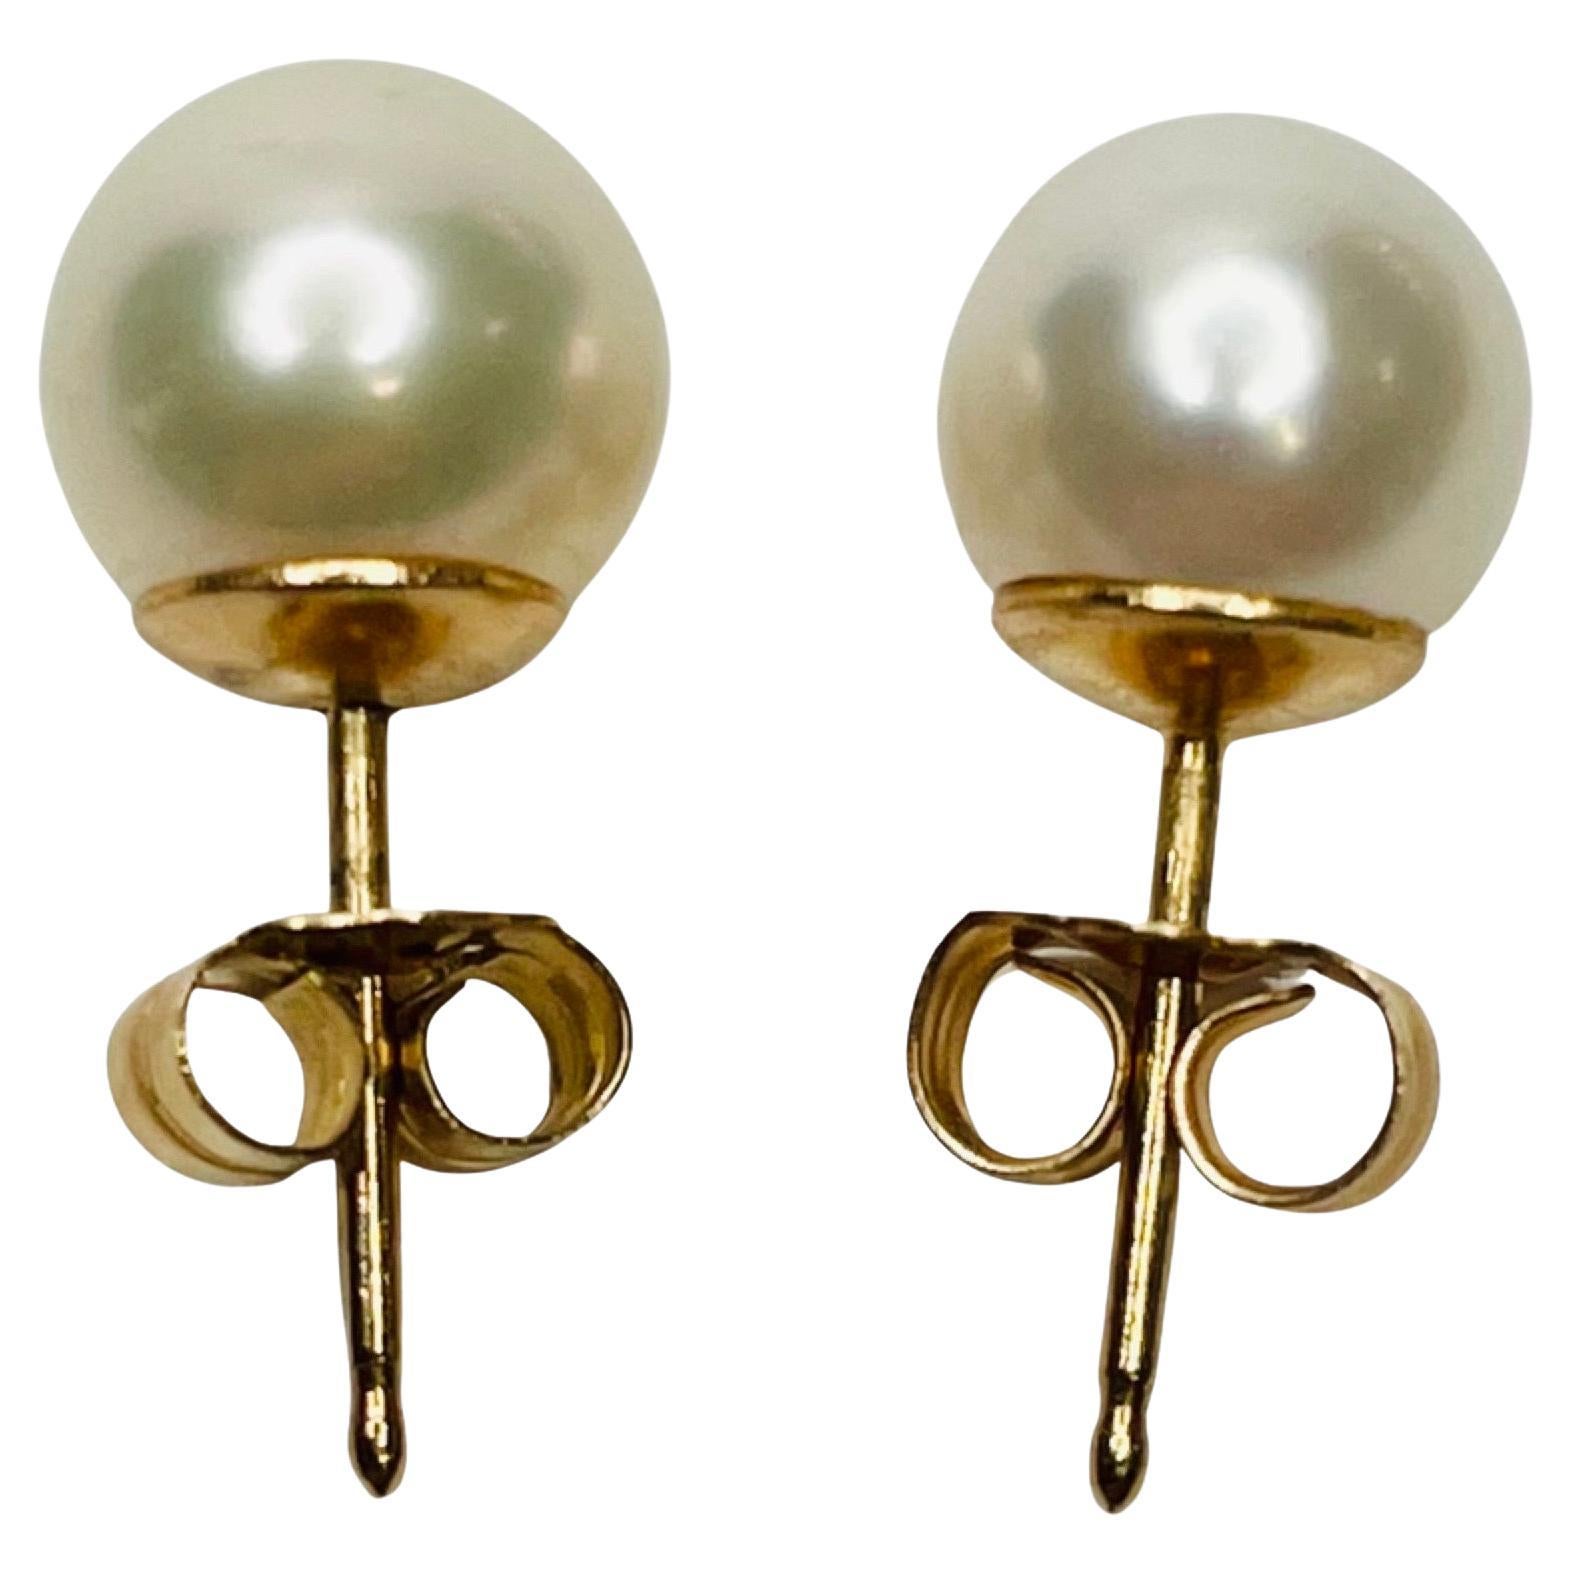 Lithos 18K Yellow Gold Cultured Japanese Akoya Pearl Earring